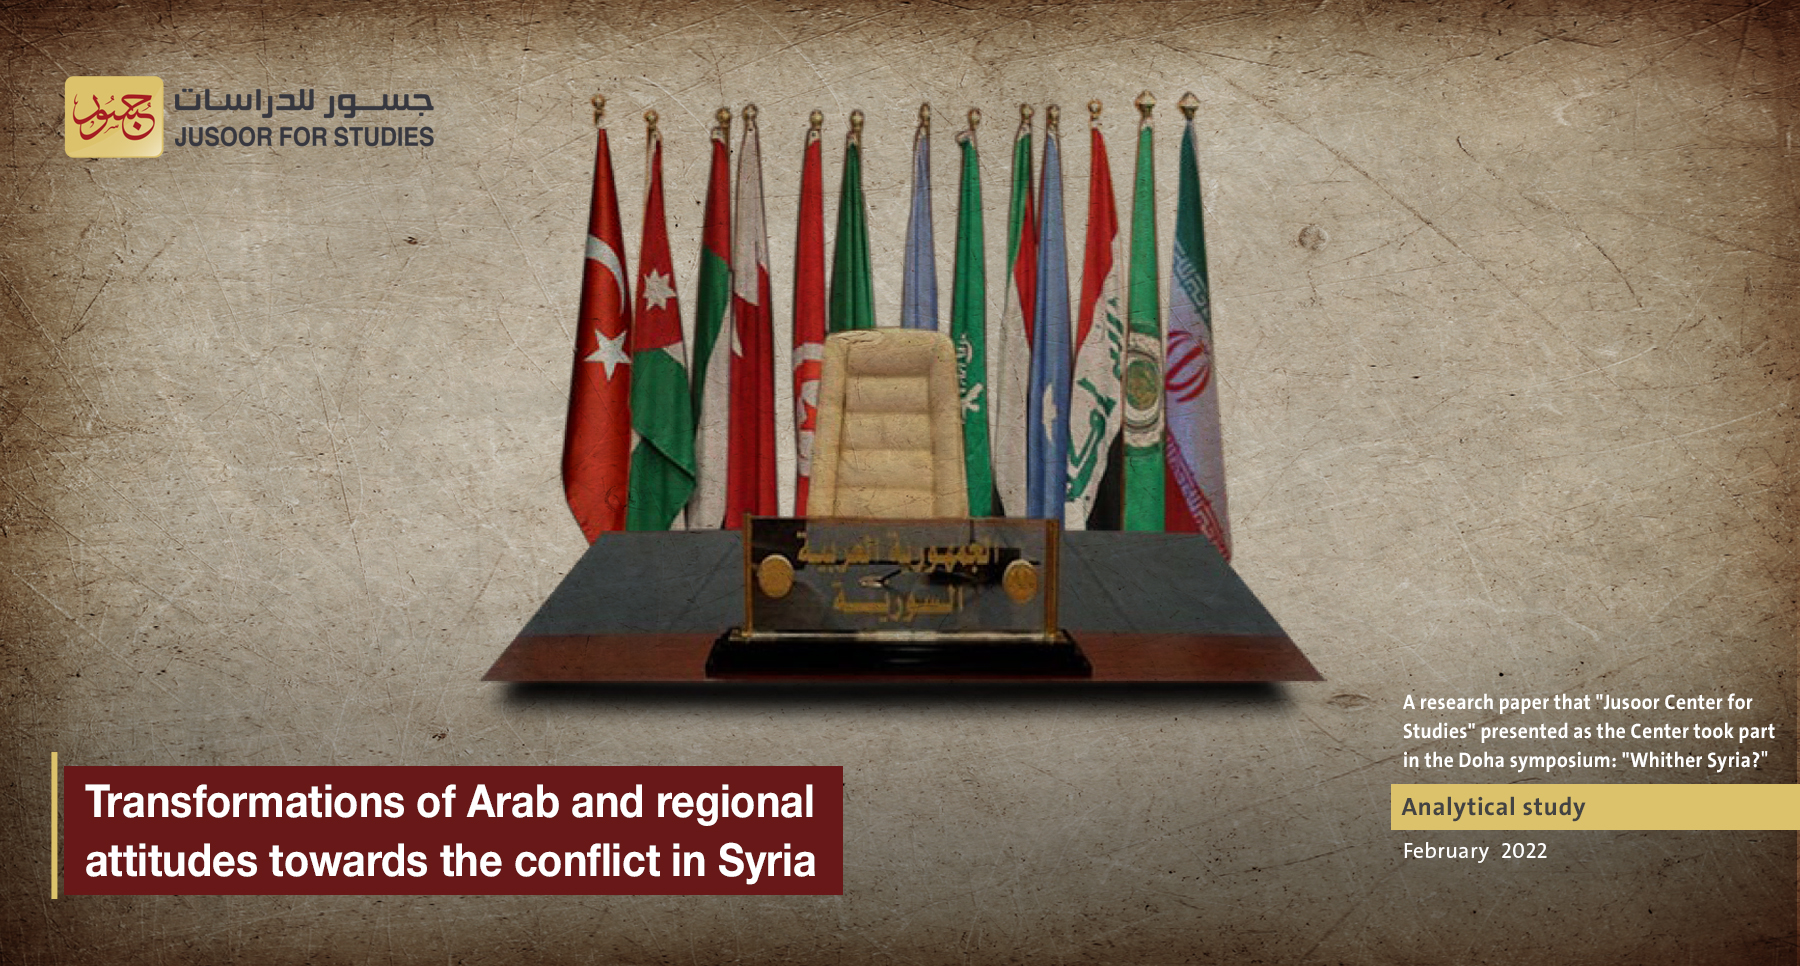 Transformations of Arab and regional attitudes towards the conflict in Syria